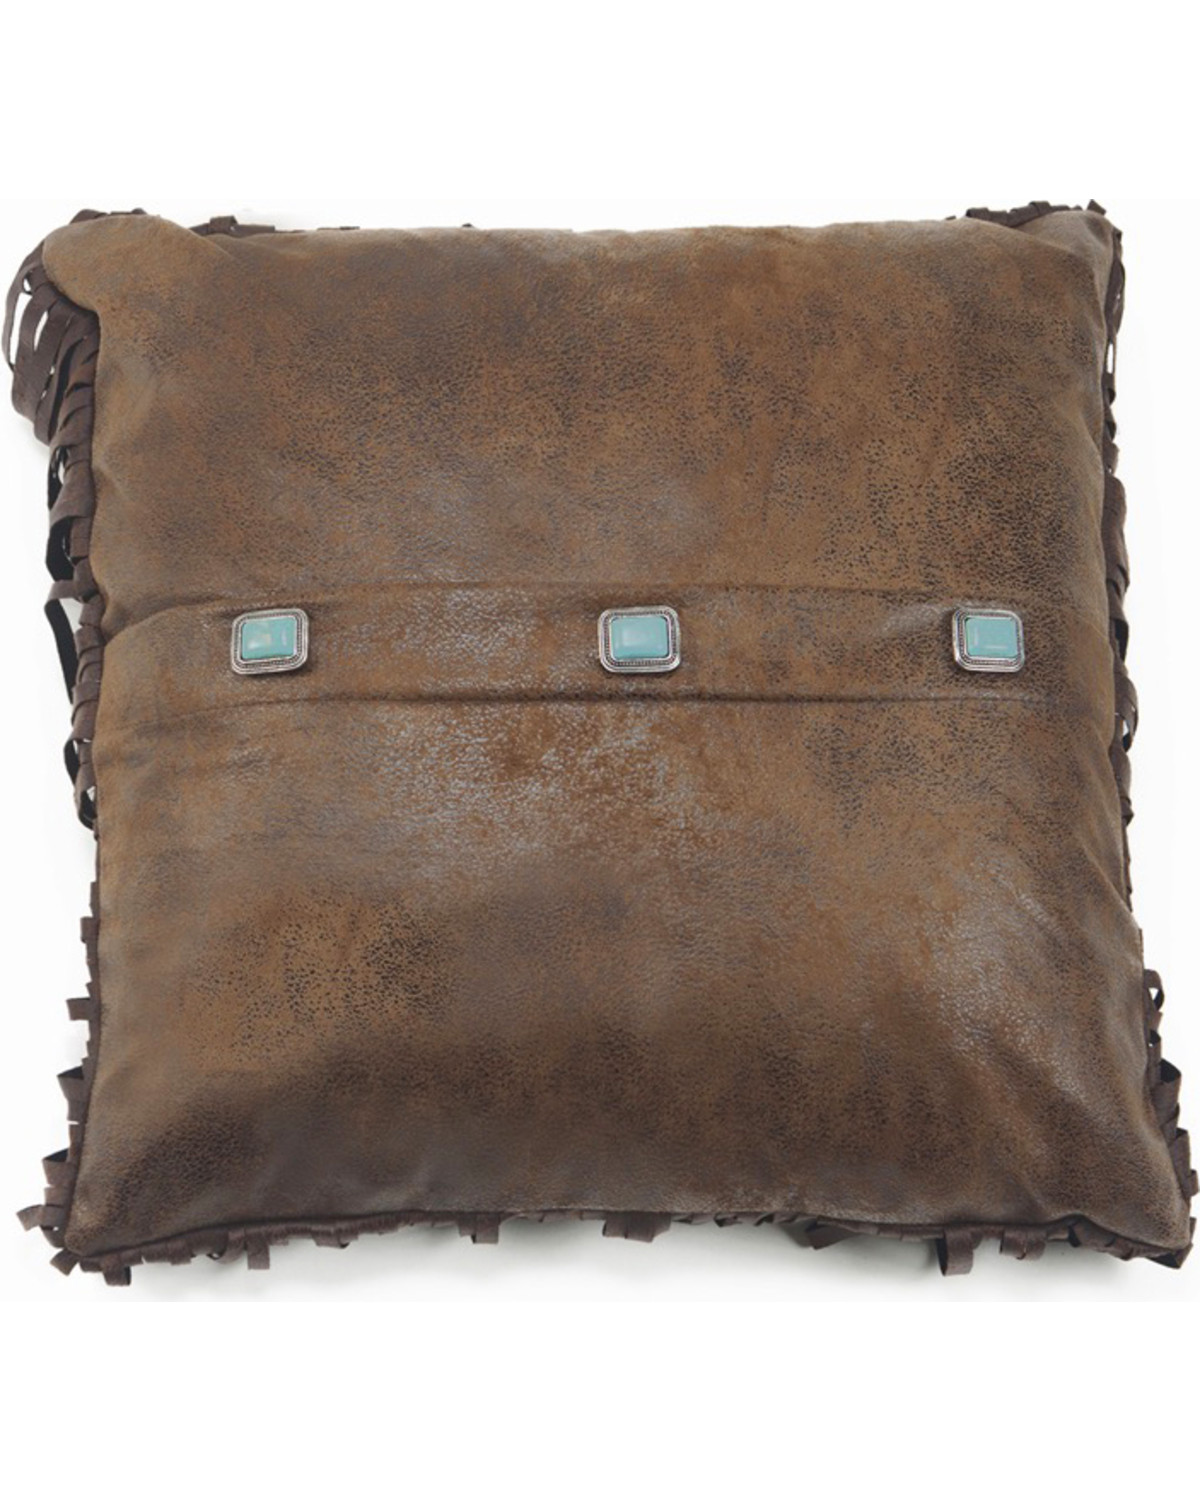 Carstens Wyoming 3 Concho Pillow